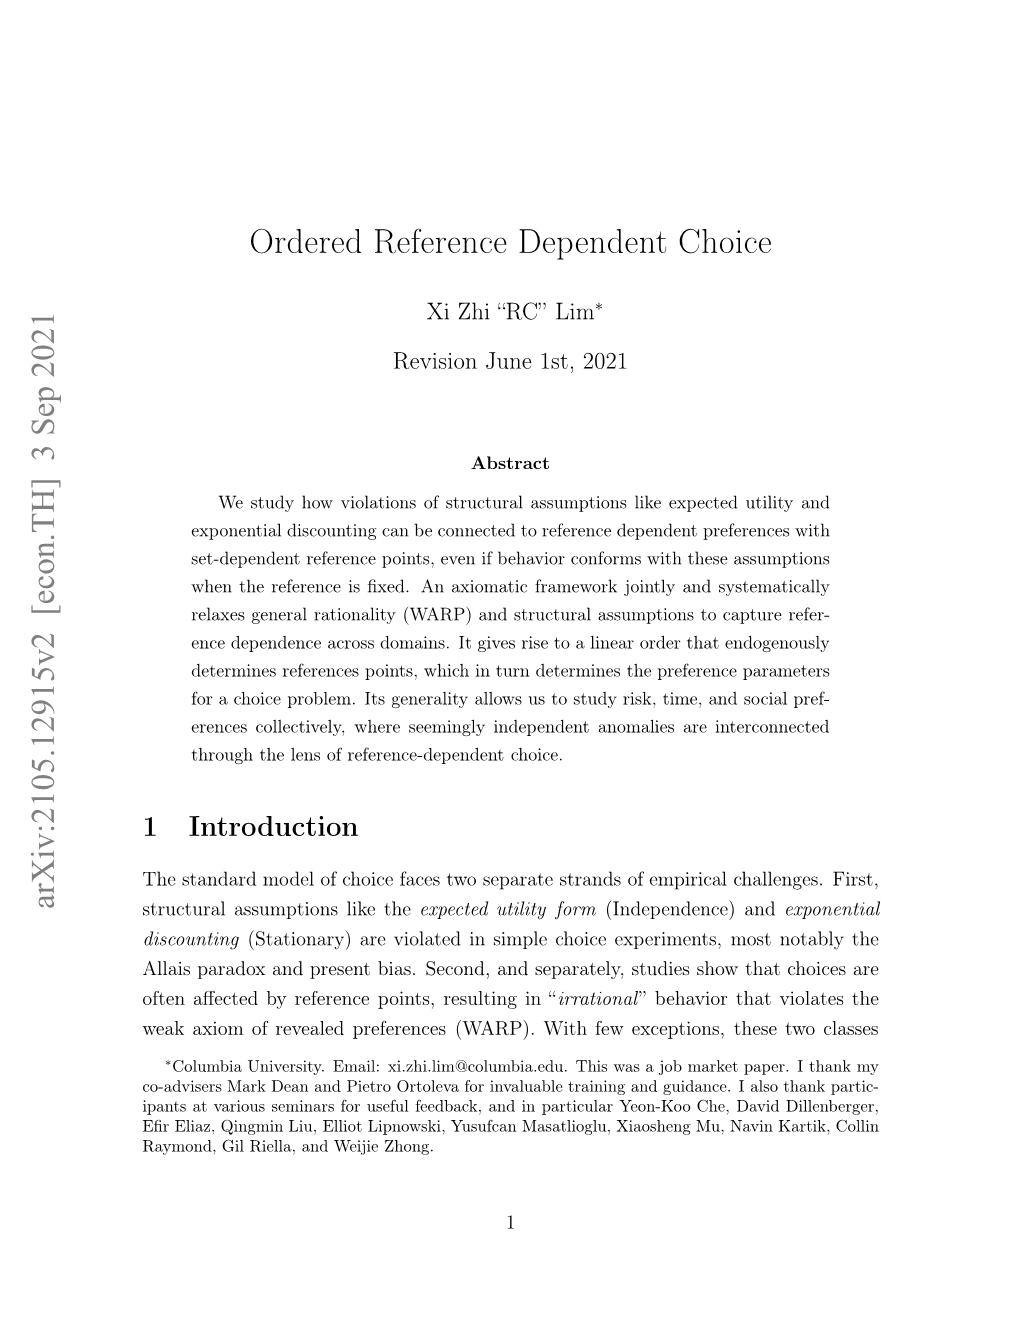 Ordered Reference Dependent Choice Arxiv:2105.12915V1 [Econ